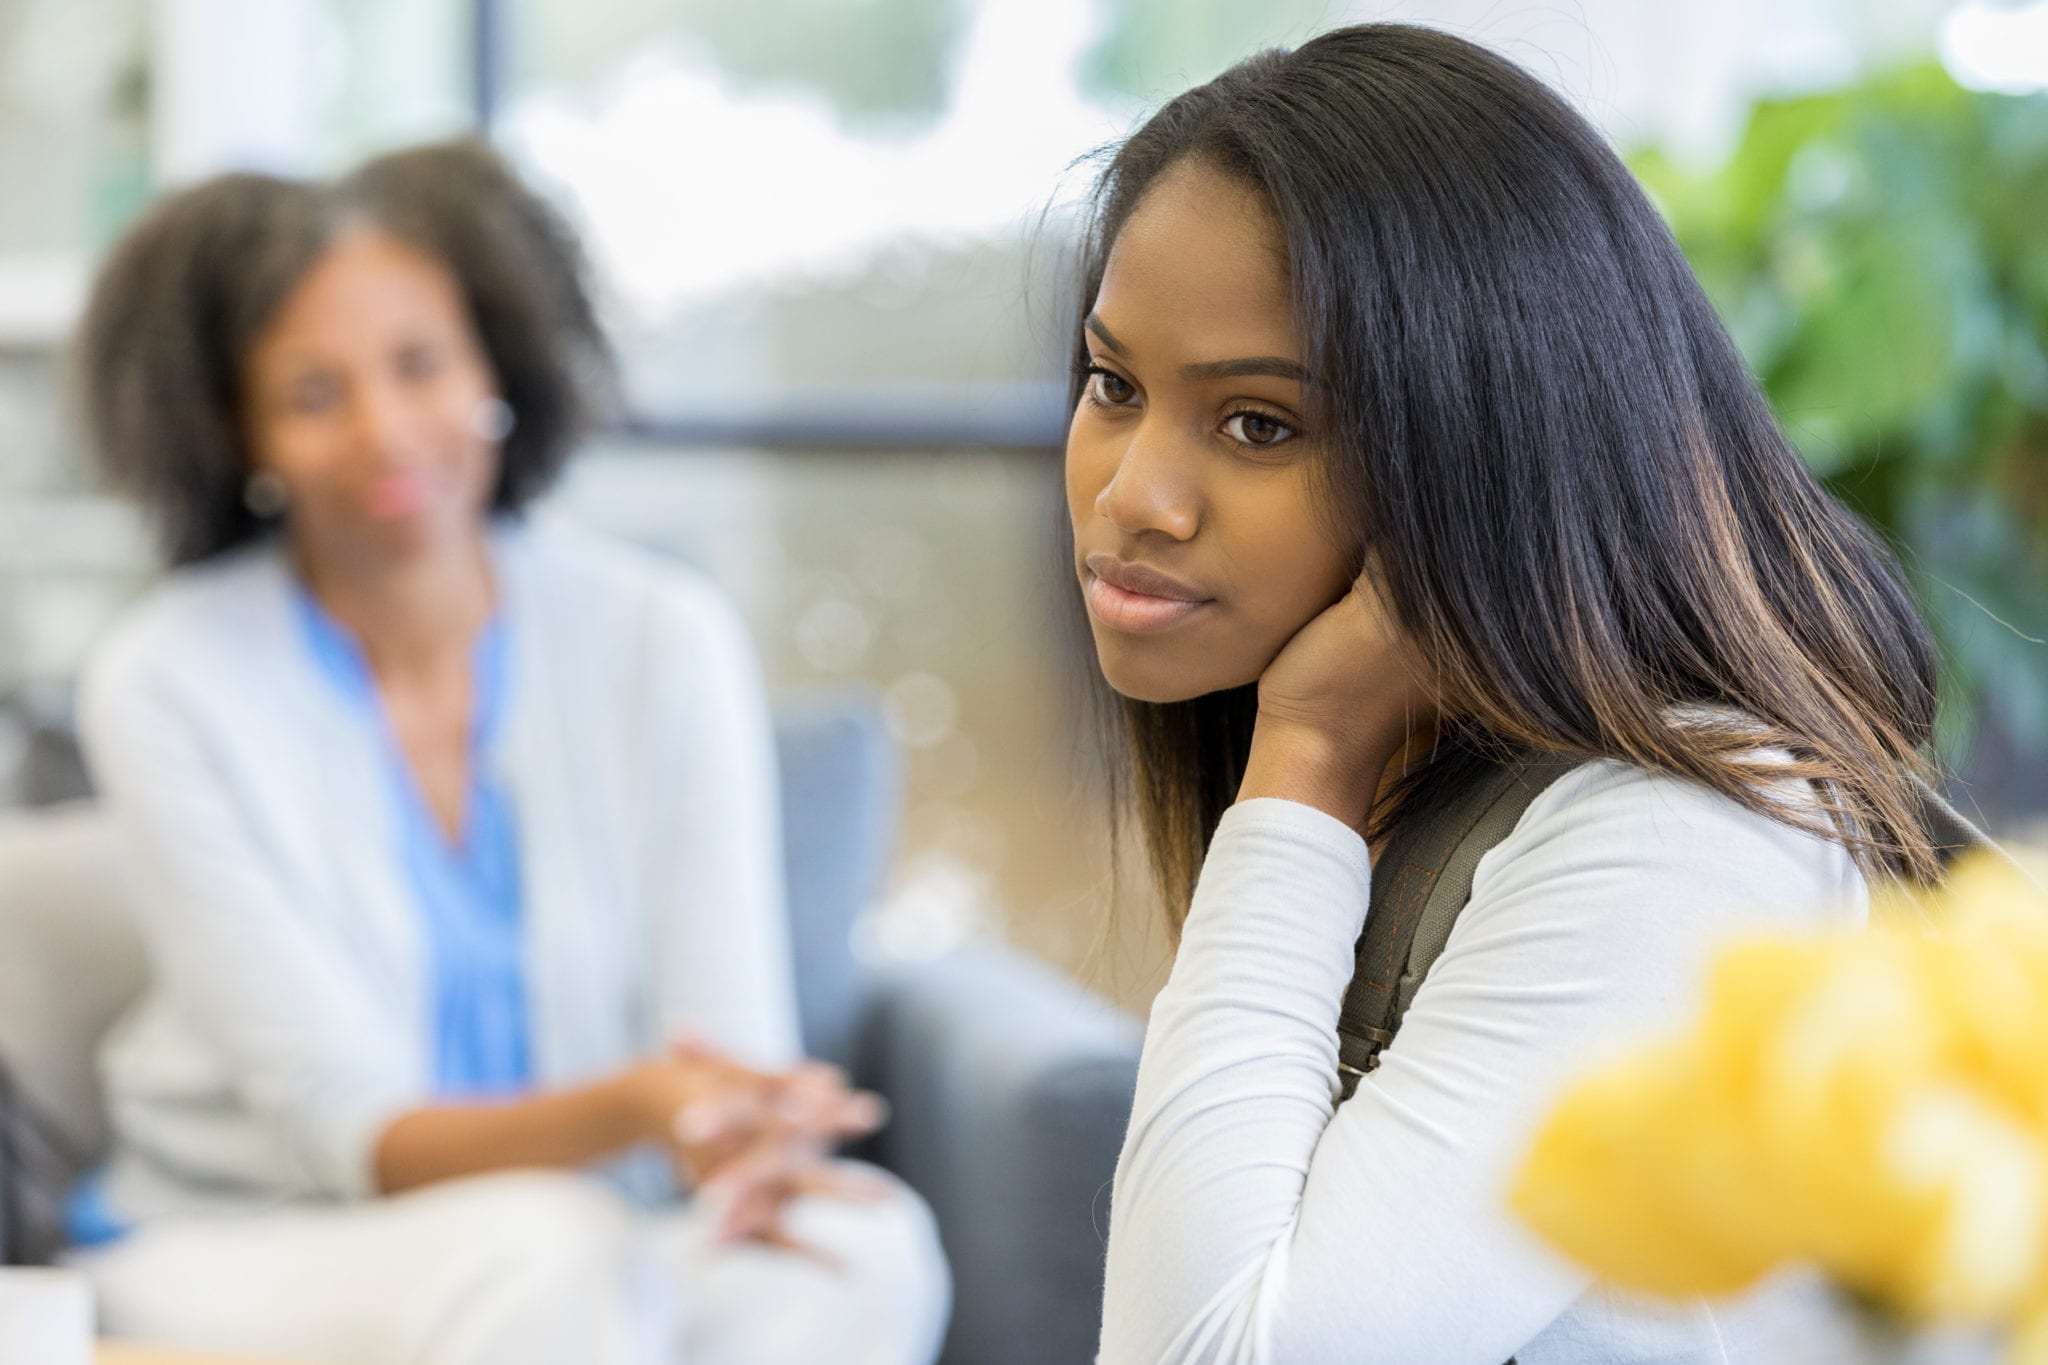 Image of a woman speaking with a teenage girl.